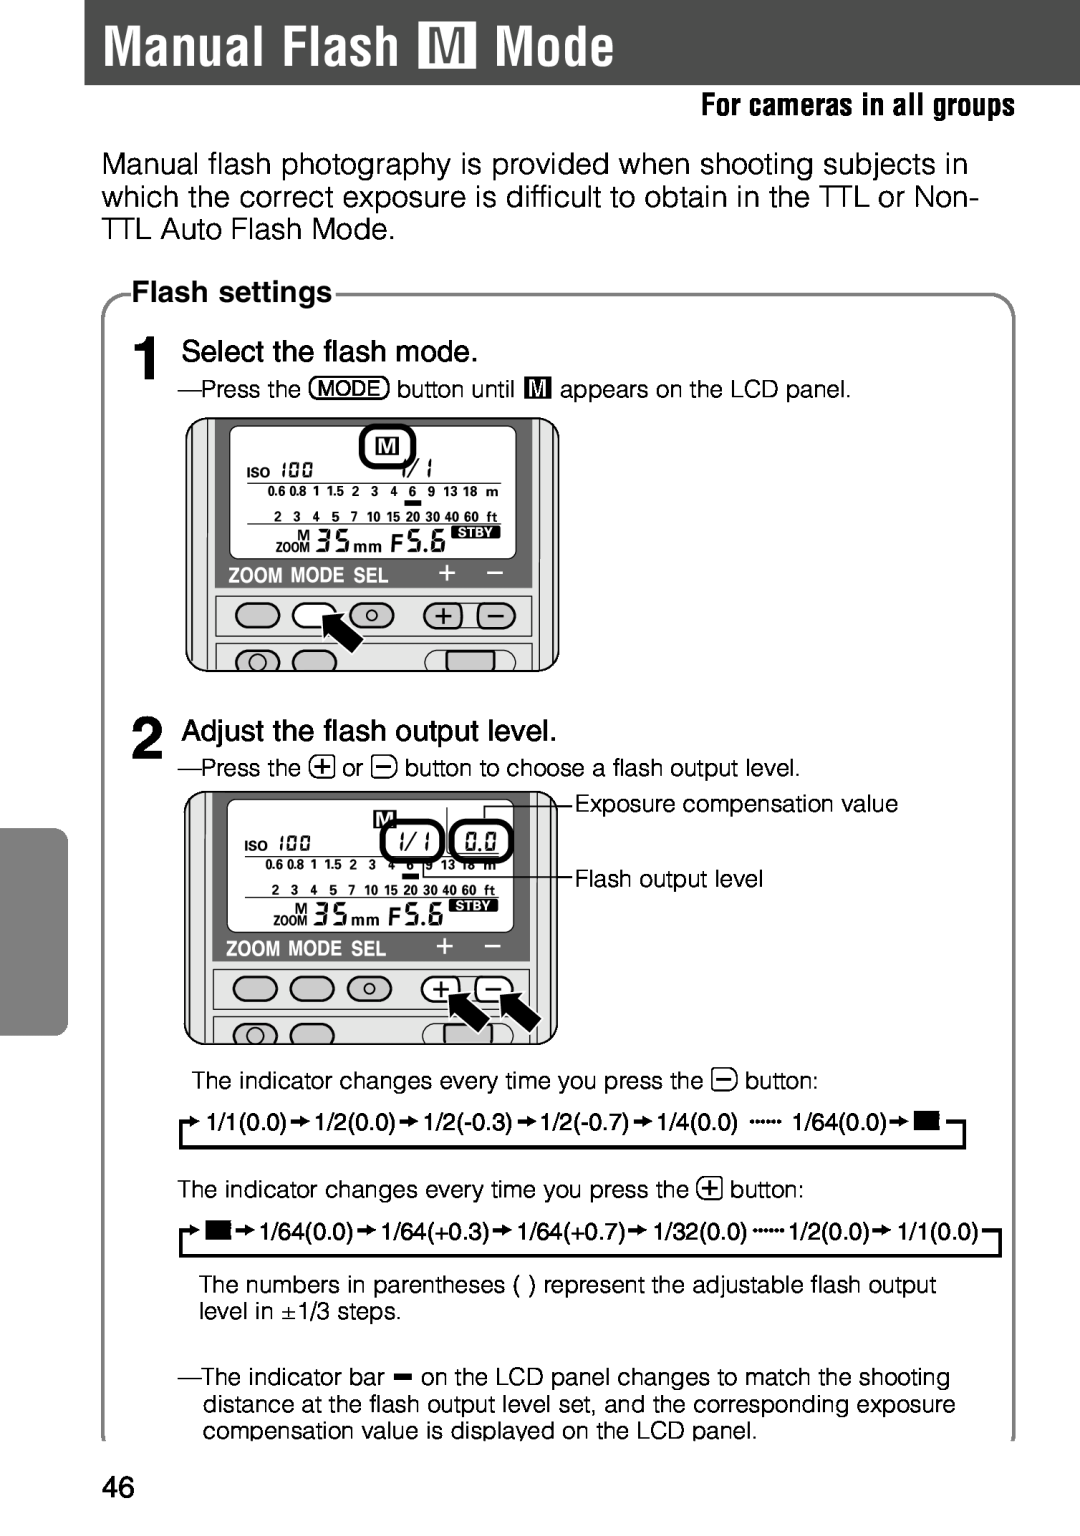 Nikon SB-28 instruction manual Manual Flash ƒ Mode, For cameras in all groups, Flash settings, 1Select the flash mode 